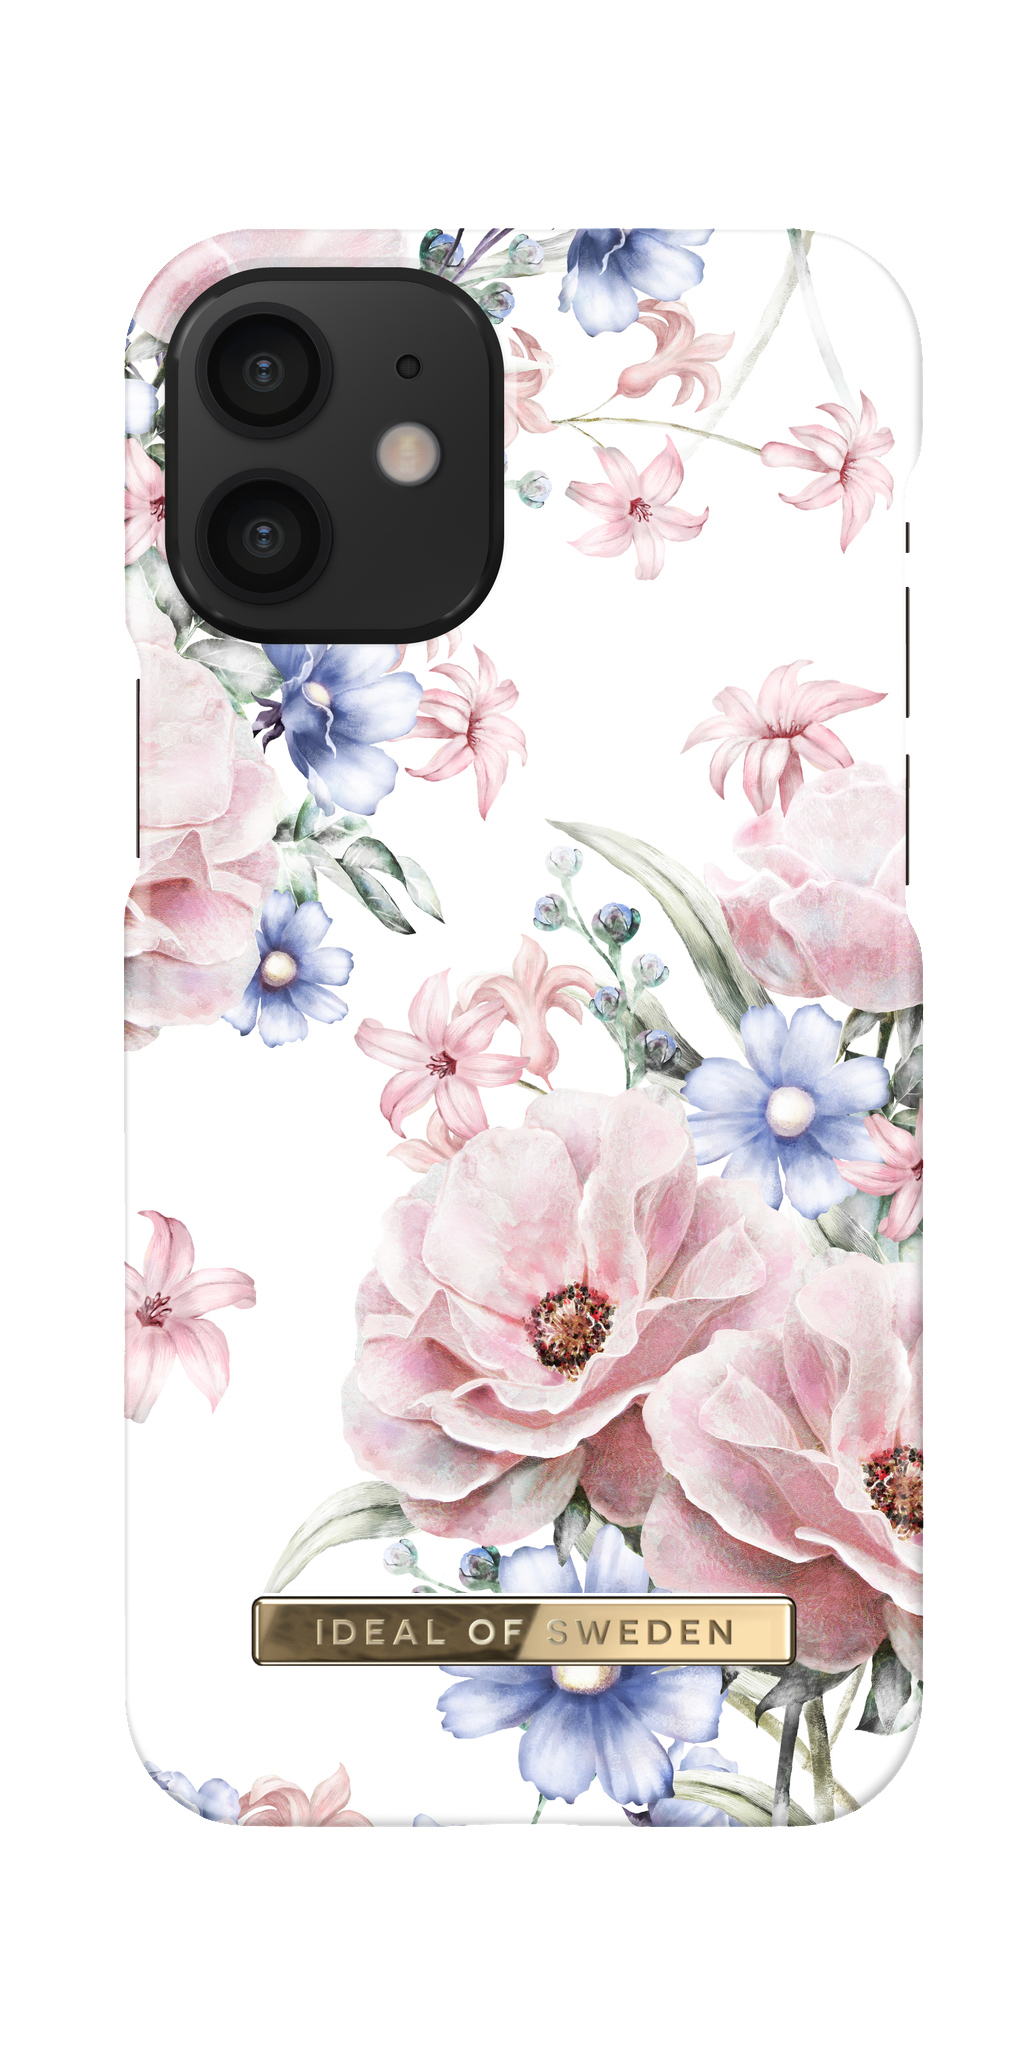 IDEAL OF Backcover, iPhone Romance 12 Case, SWEDEN Apple, Fashion Floral Mini